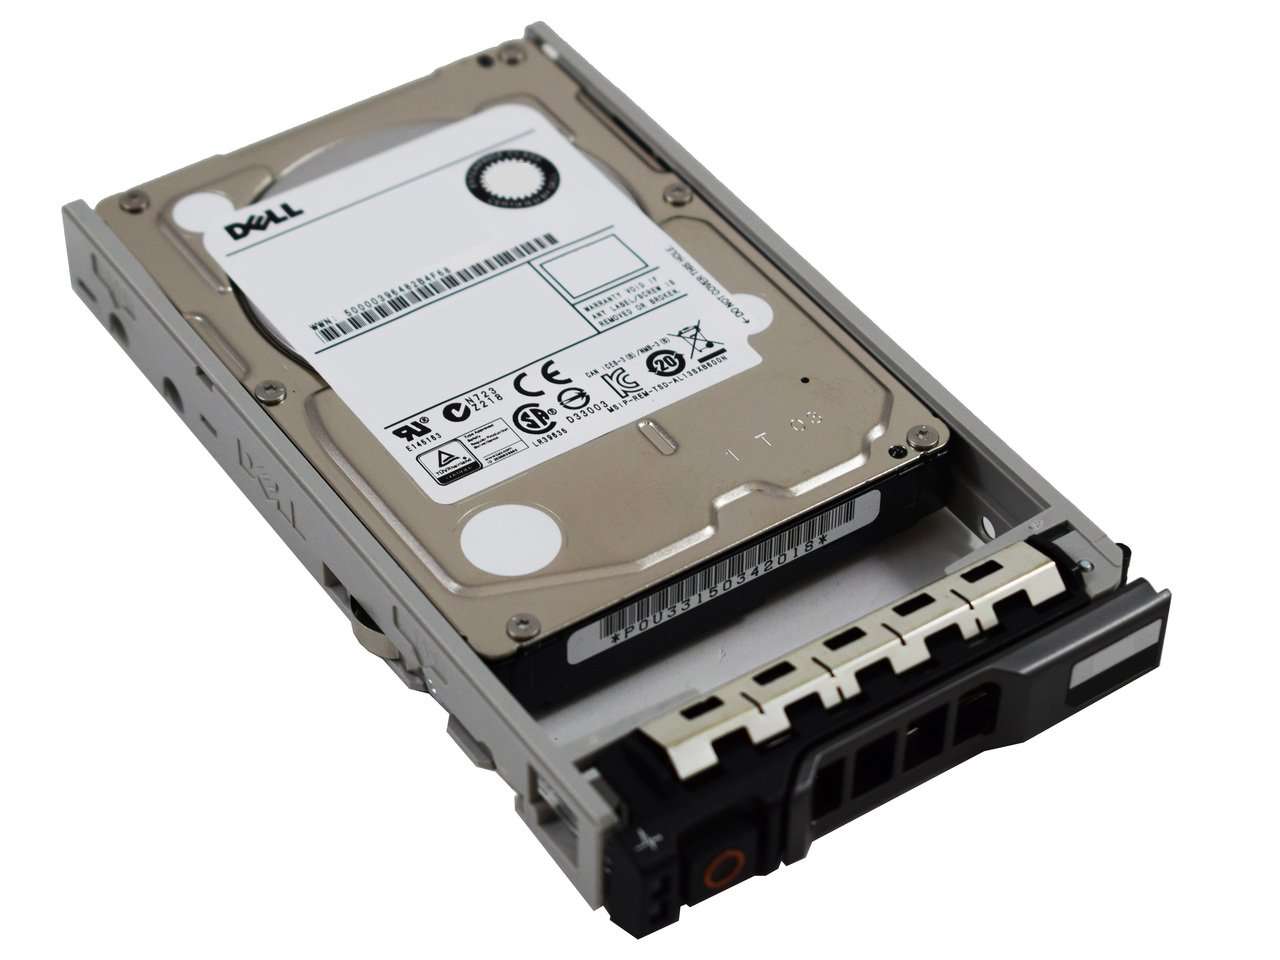 Dell G13 342-5740 600GB 10K RPM SAS 6Gb/s 512n 2.5" Manufacturer Recertified HDD